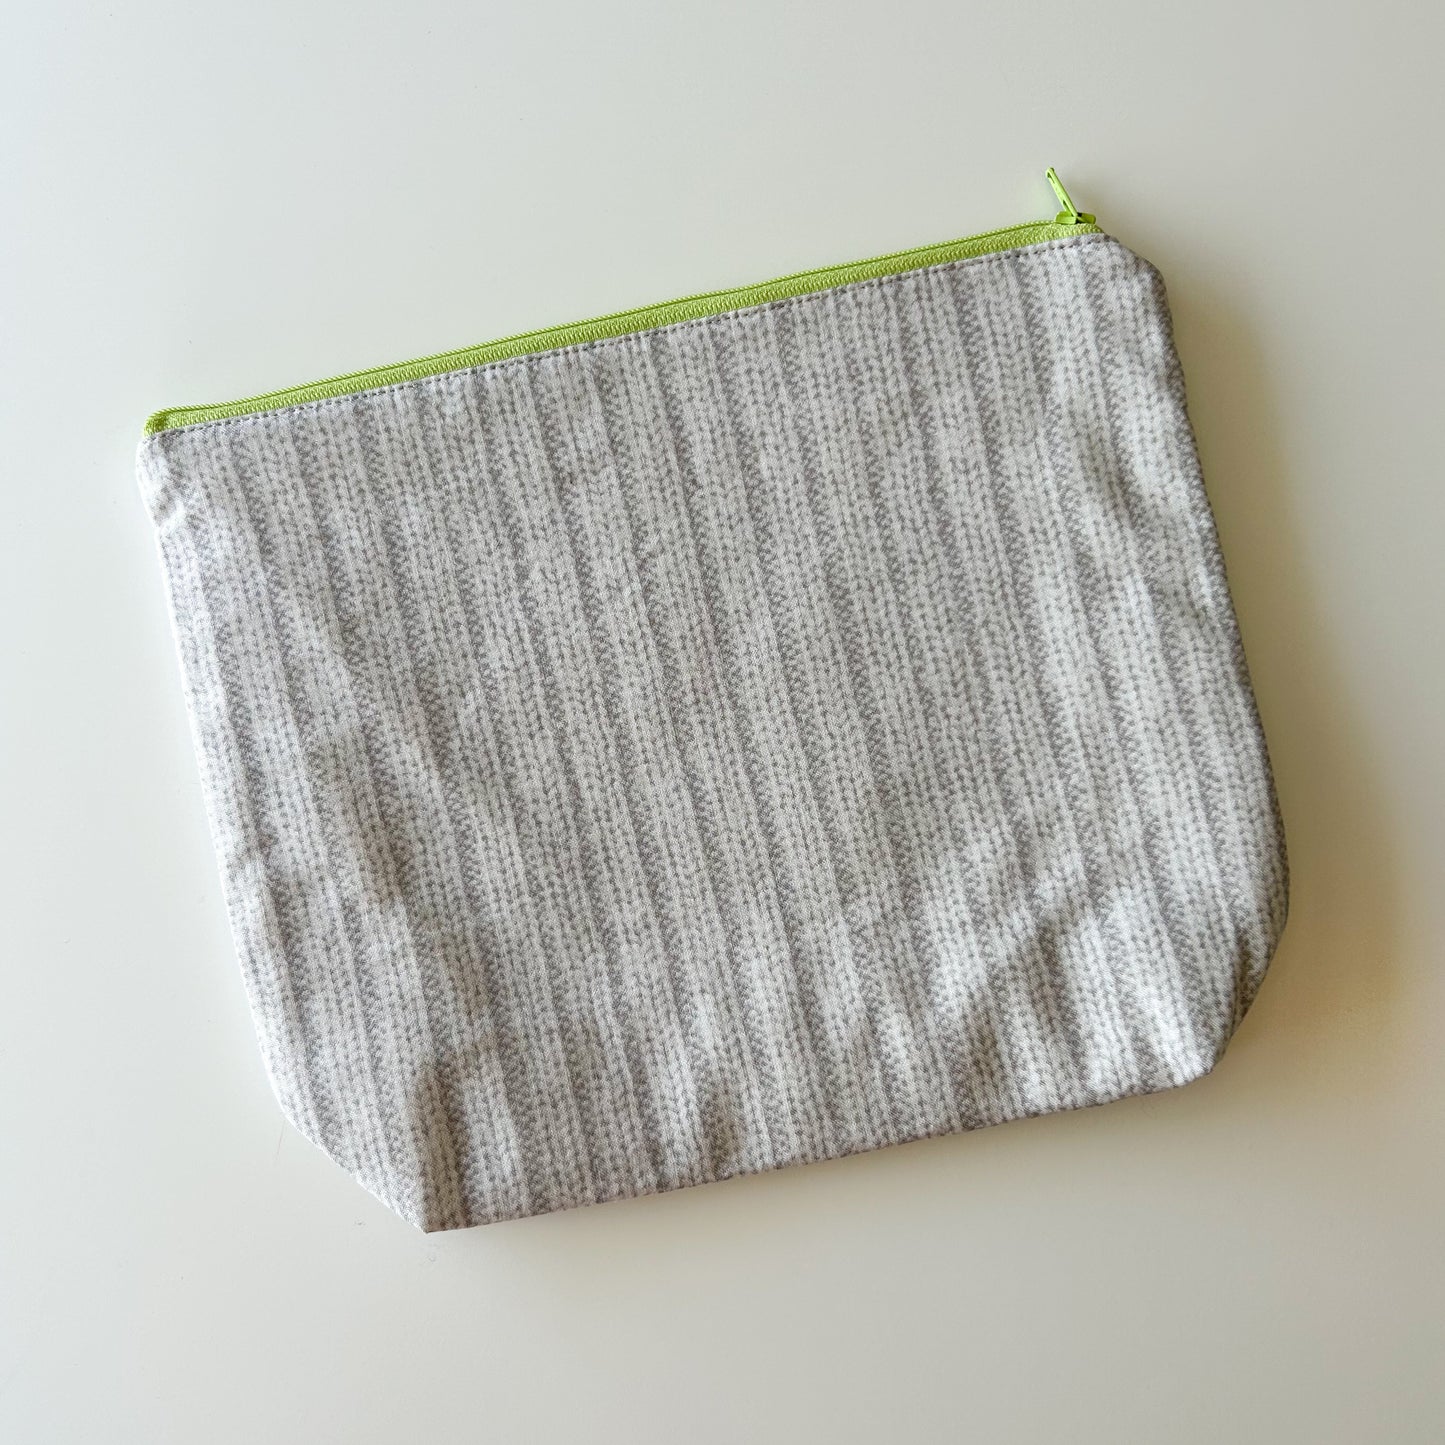 Sock Project Bag - Grey/White Ribbed Stitch